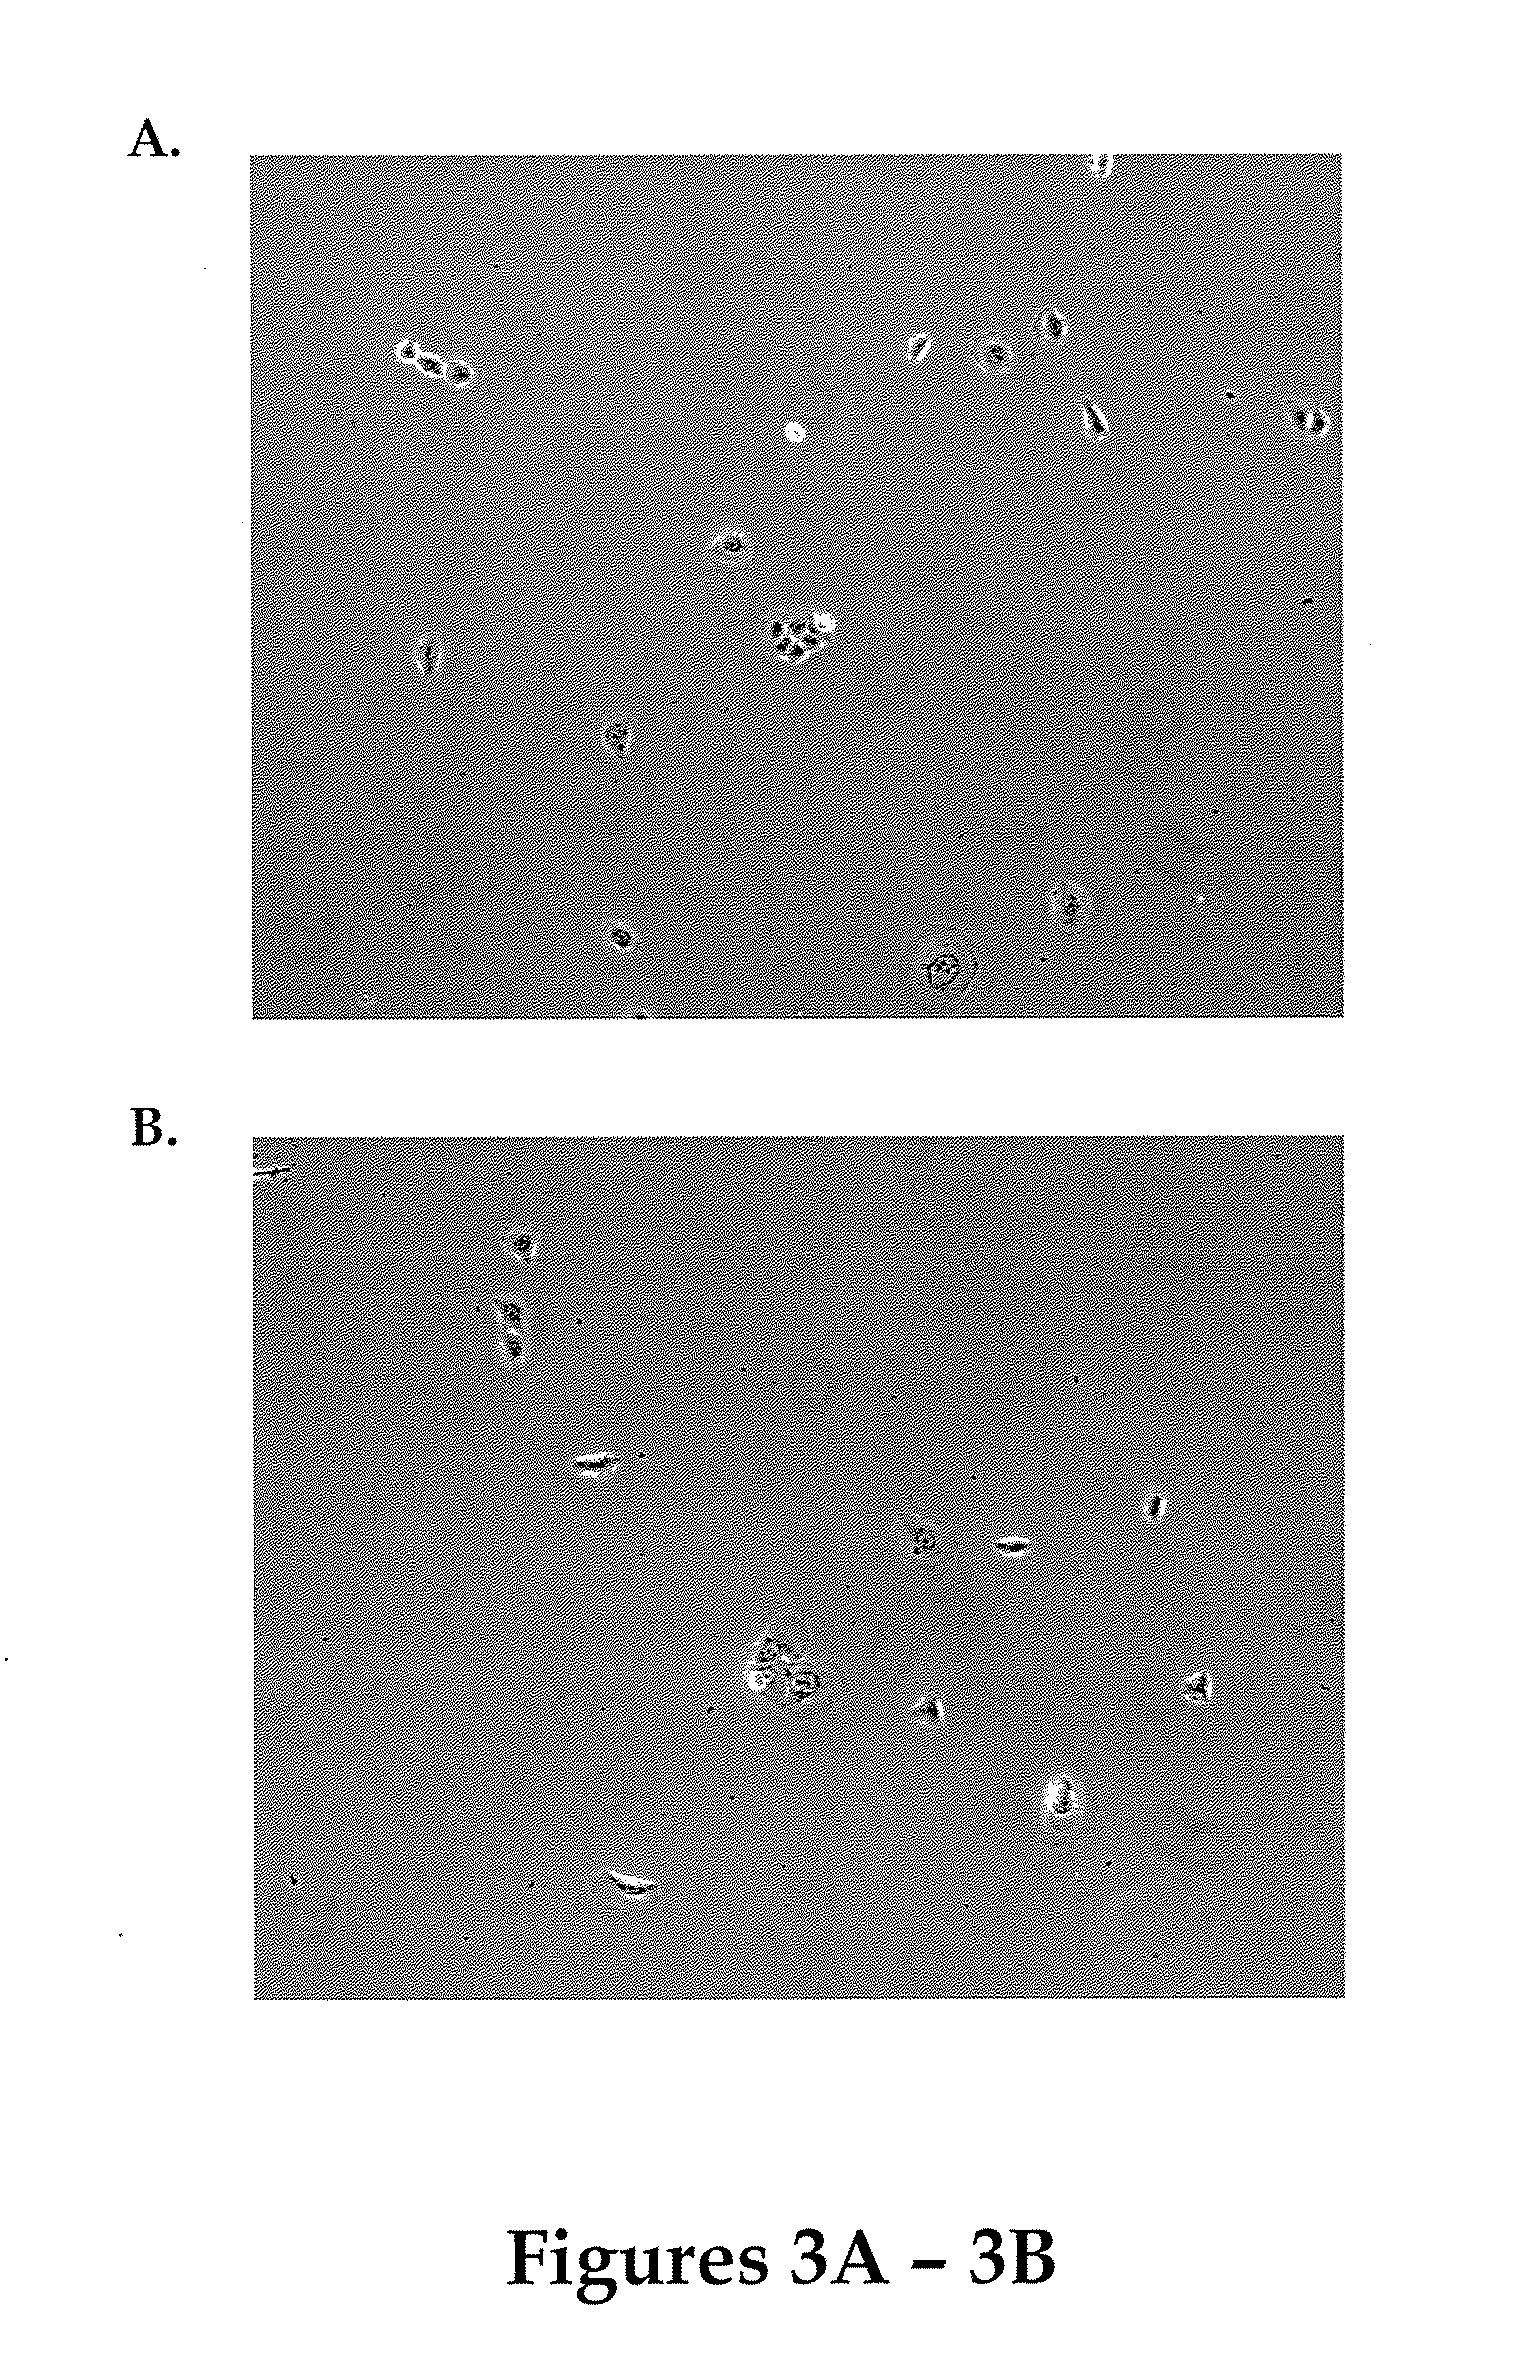 Culture Media For Expansion and Differentiation of Epidermal Cells and Uses Thereof For In Vitro Growth of Hair Follicles